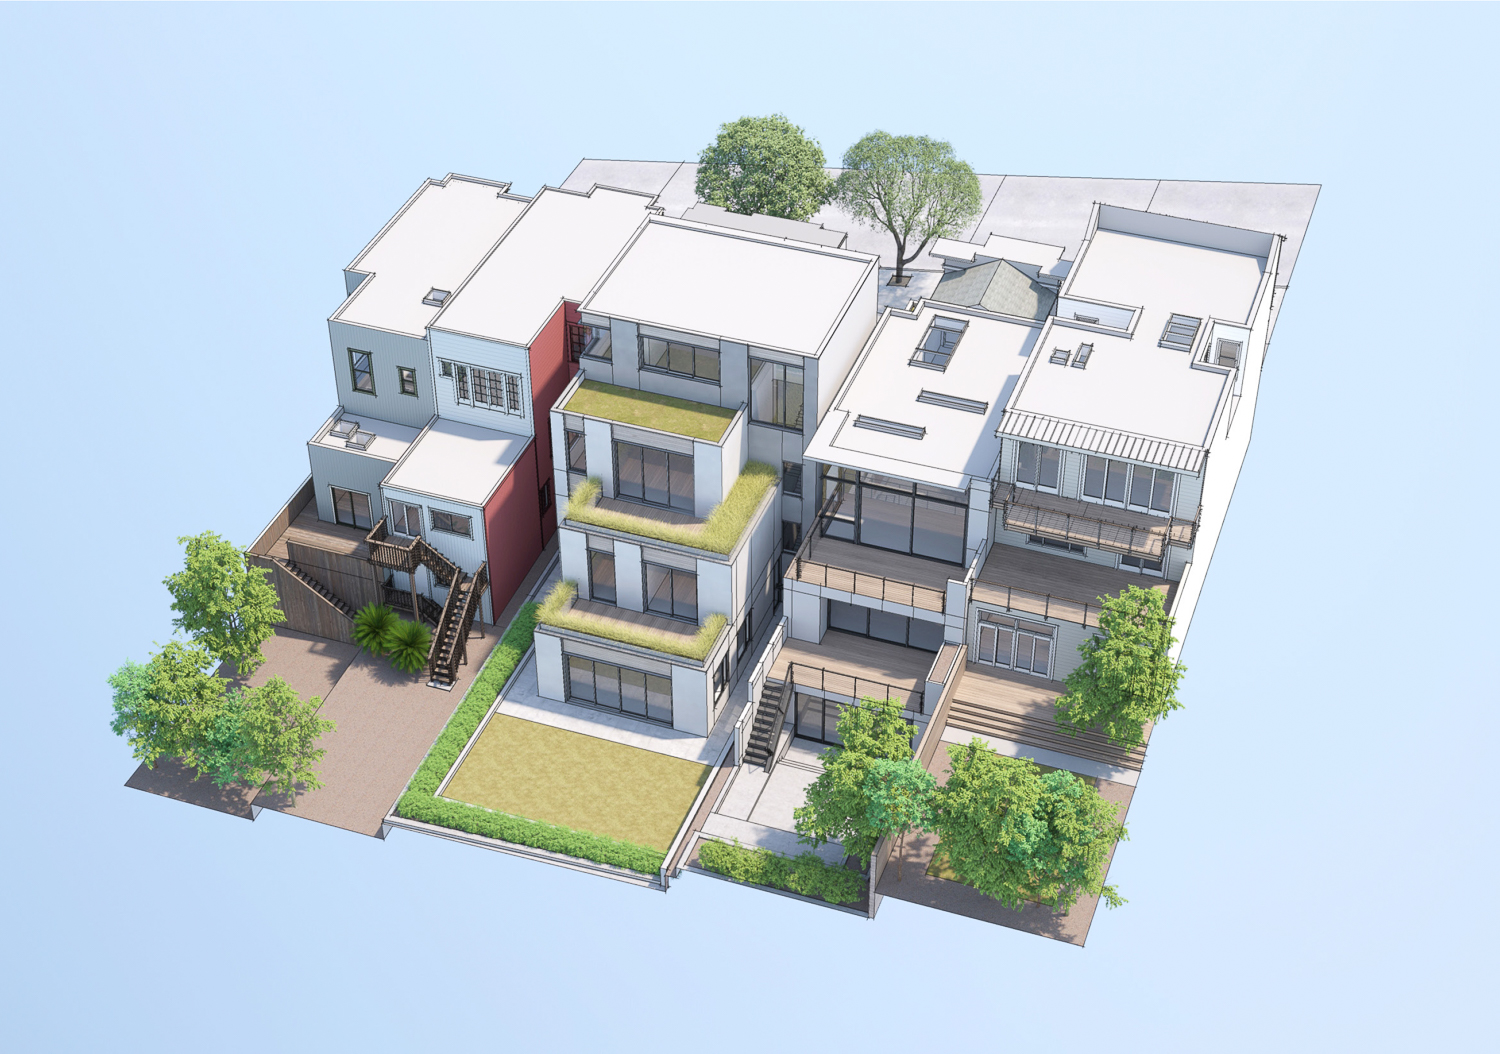 4250 26th Street aerial view, rendering by Edmonds + Lee Architects